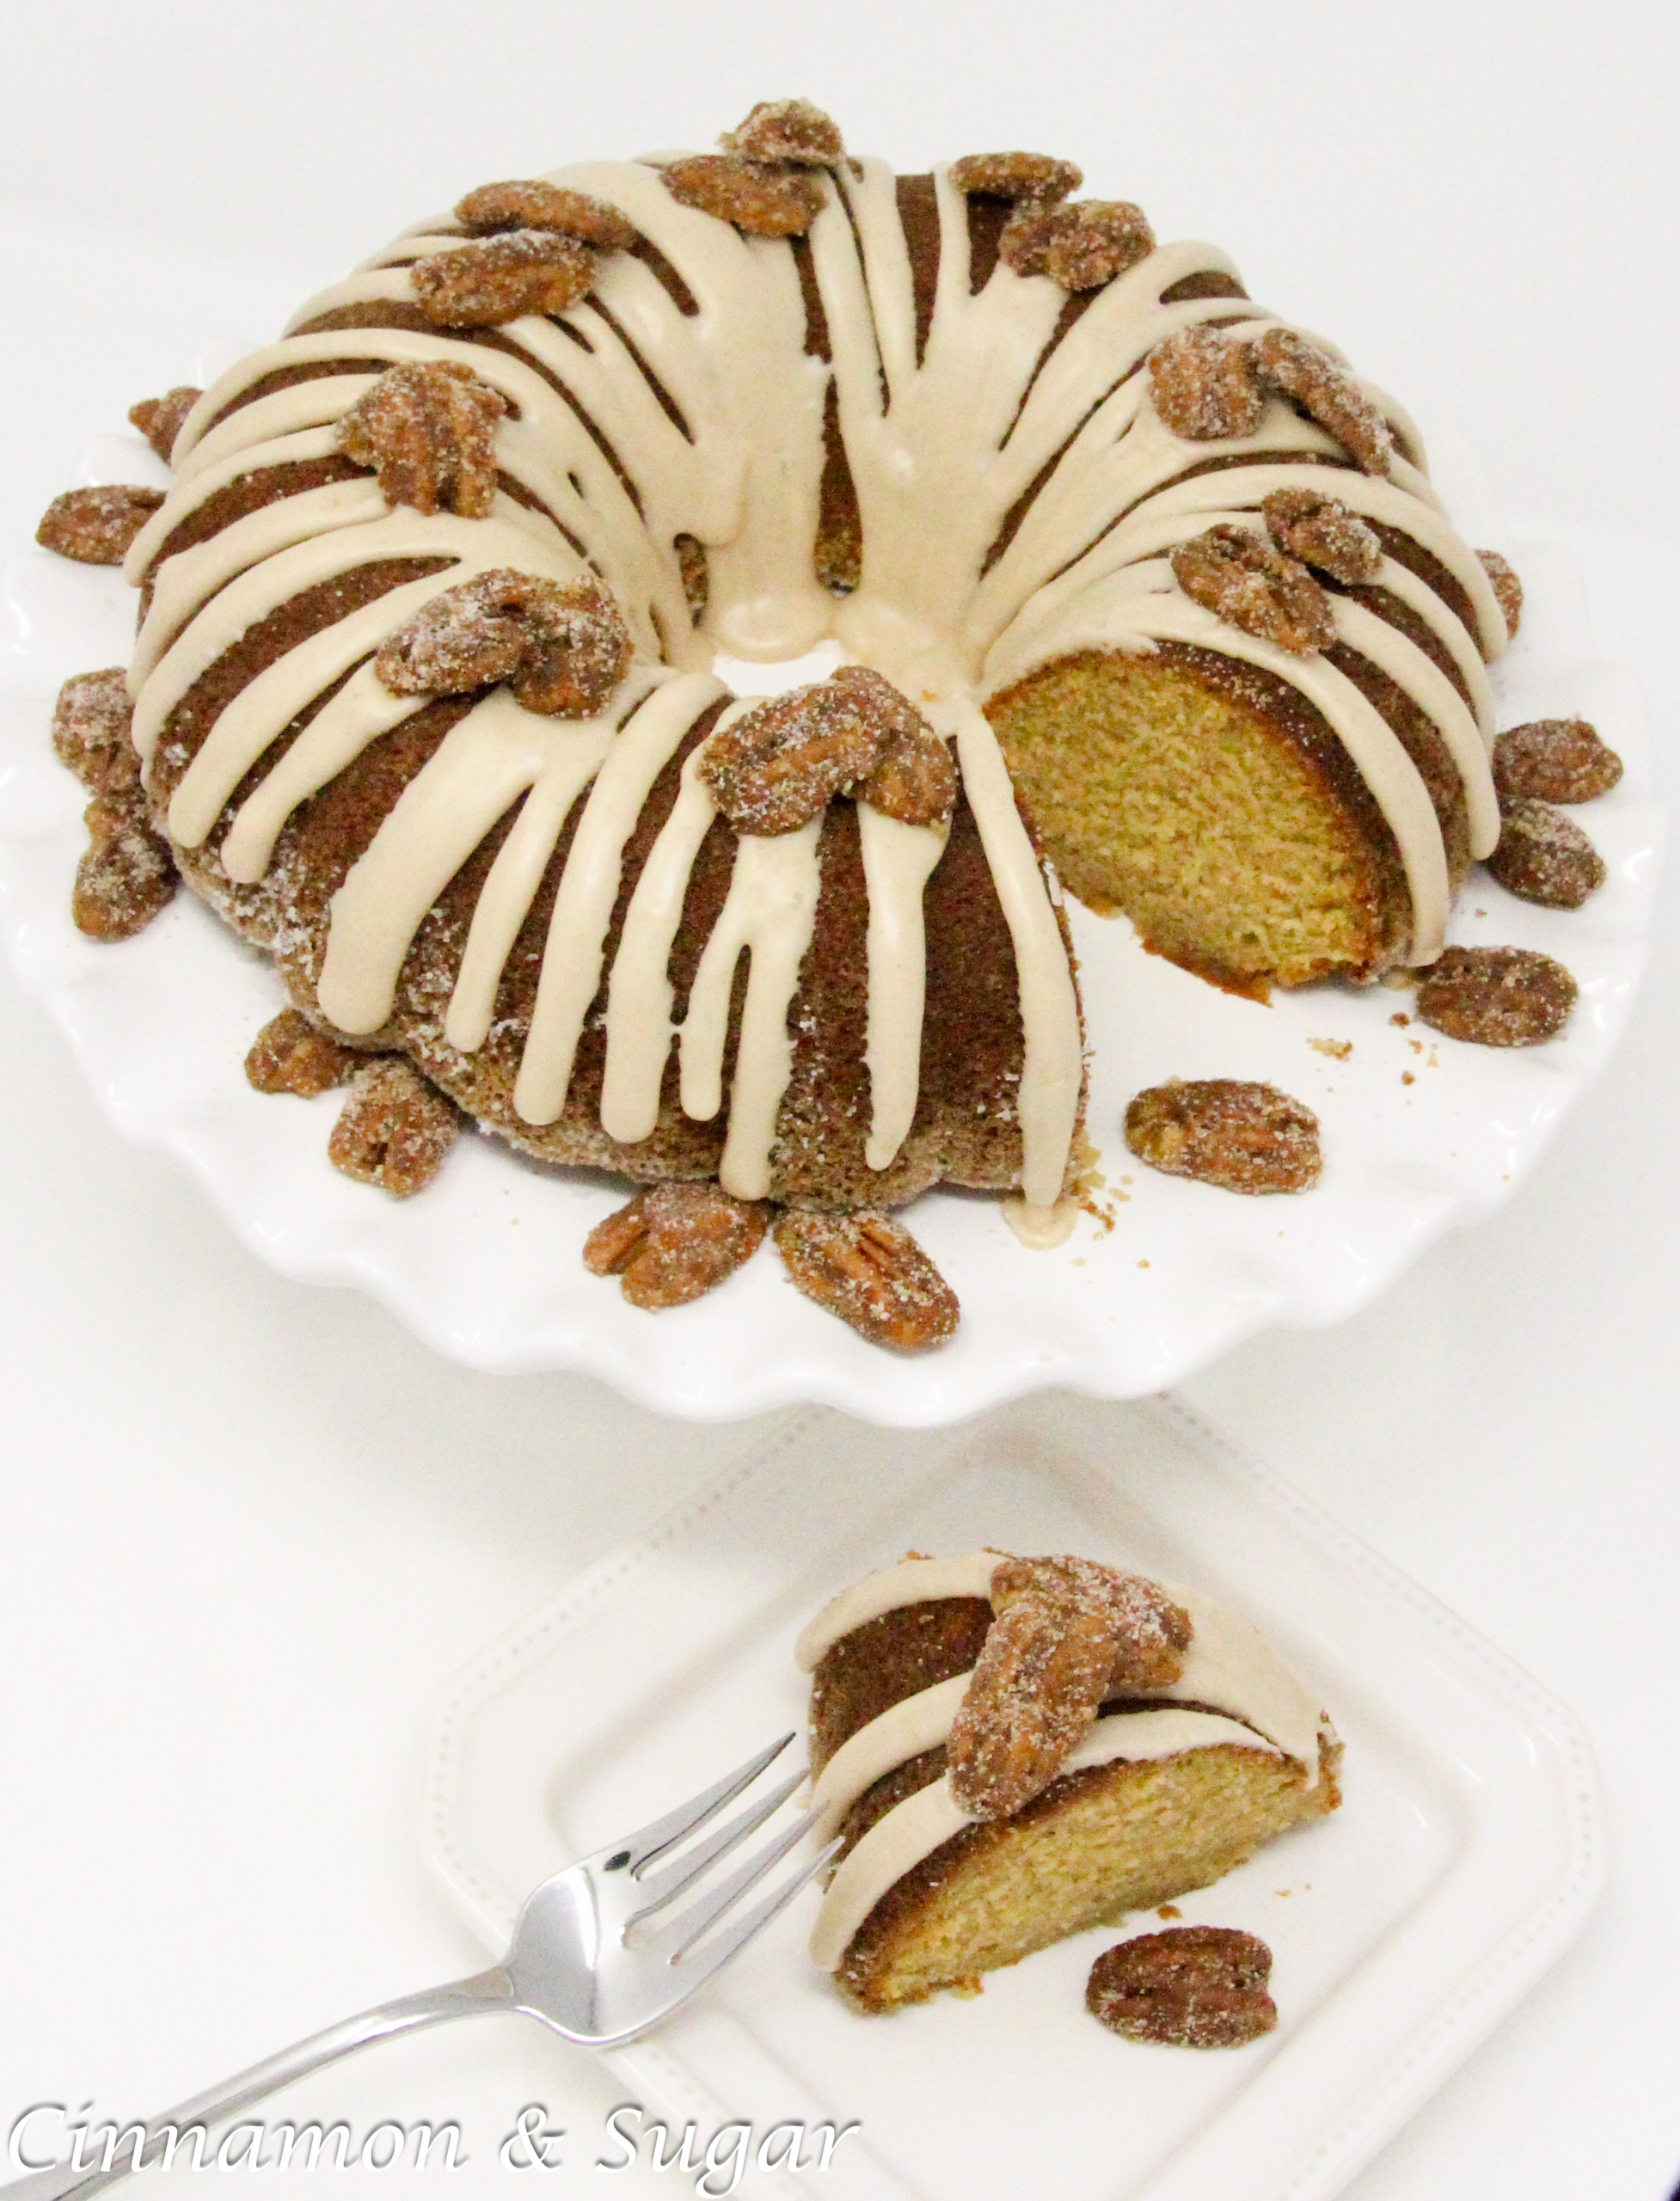 Maple Bundt cake with maple cinnamon glaze and candied pecans is a moist cake with caramel-y maple flavor. Paired with maple cinnamon glaze and candied pecans, this dessert becomes company-worthy! Recipe created by Cinnamon & Sugar for Catherine Bruns, author of SYRUP TO NO GOOD. 